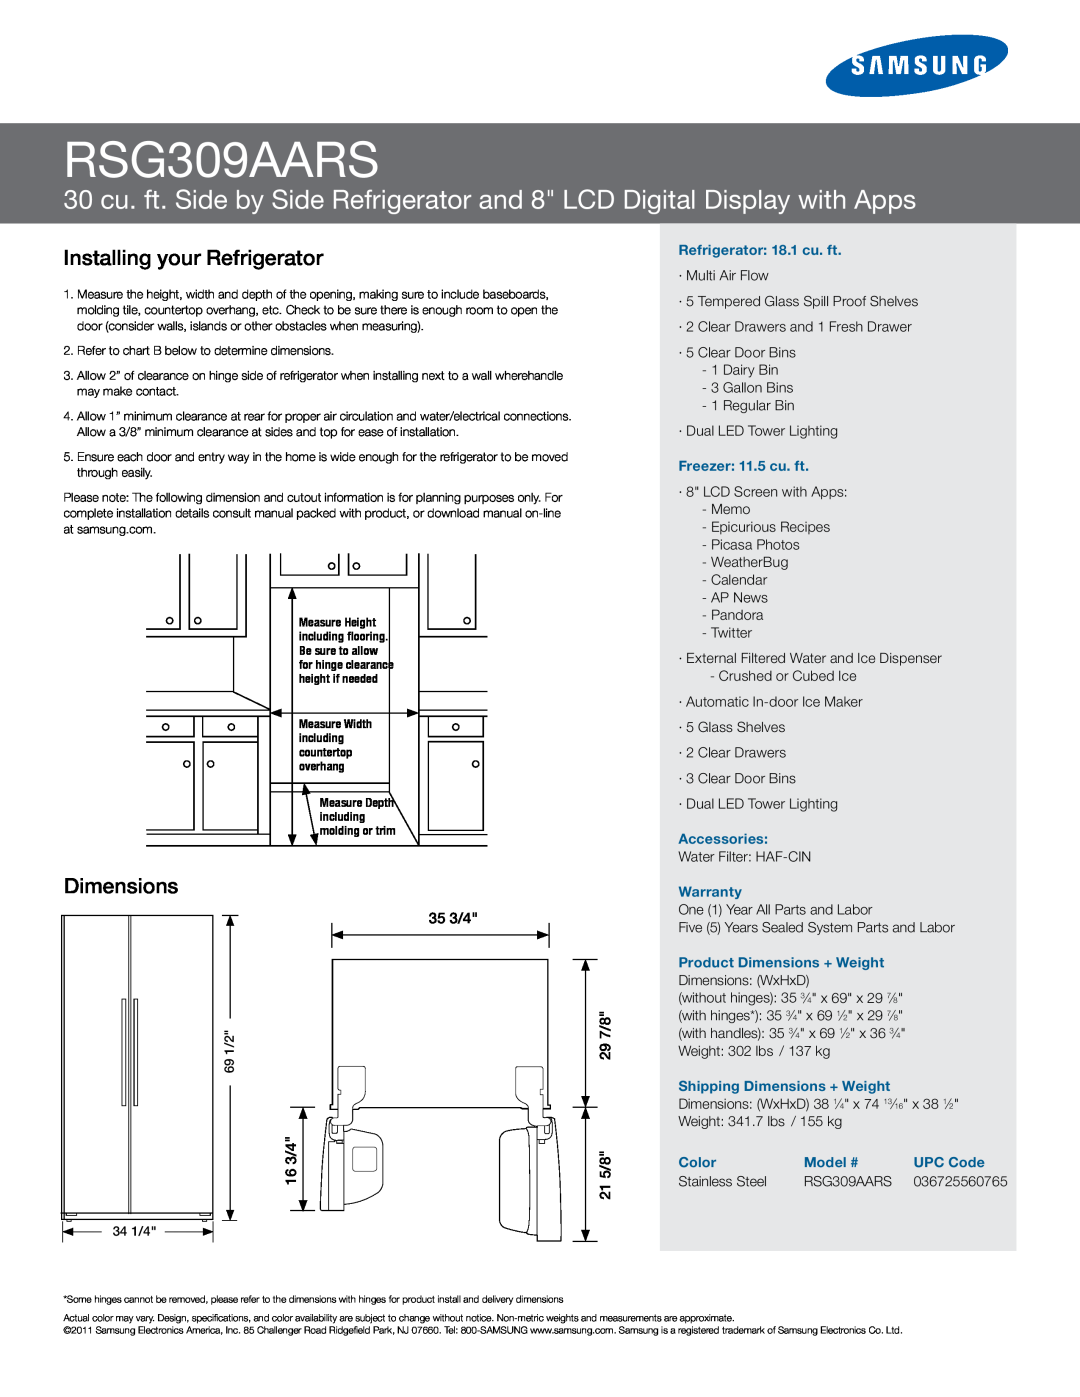 Samsung RSG309AARS manual Installing your Refrigerator, Dimensions, 35 3/4 